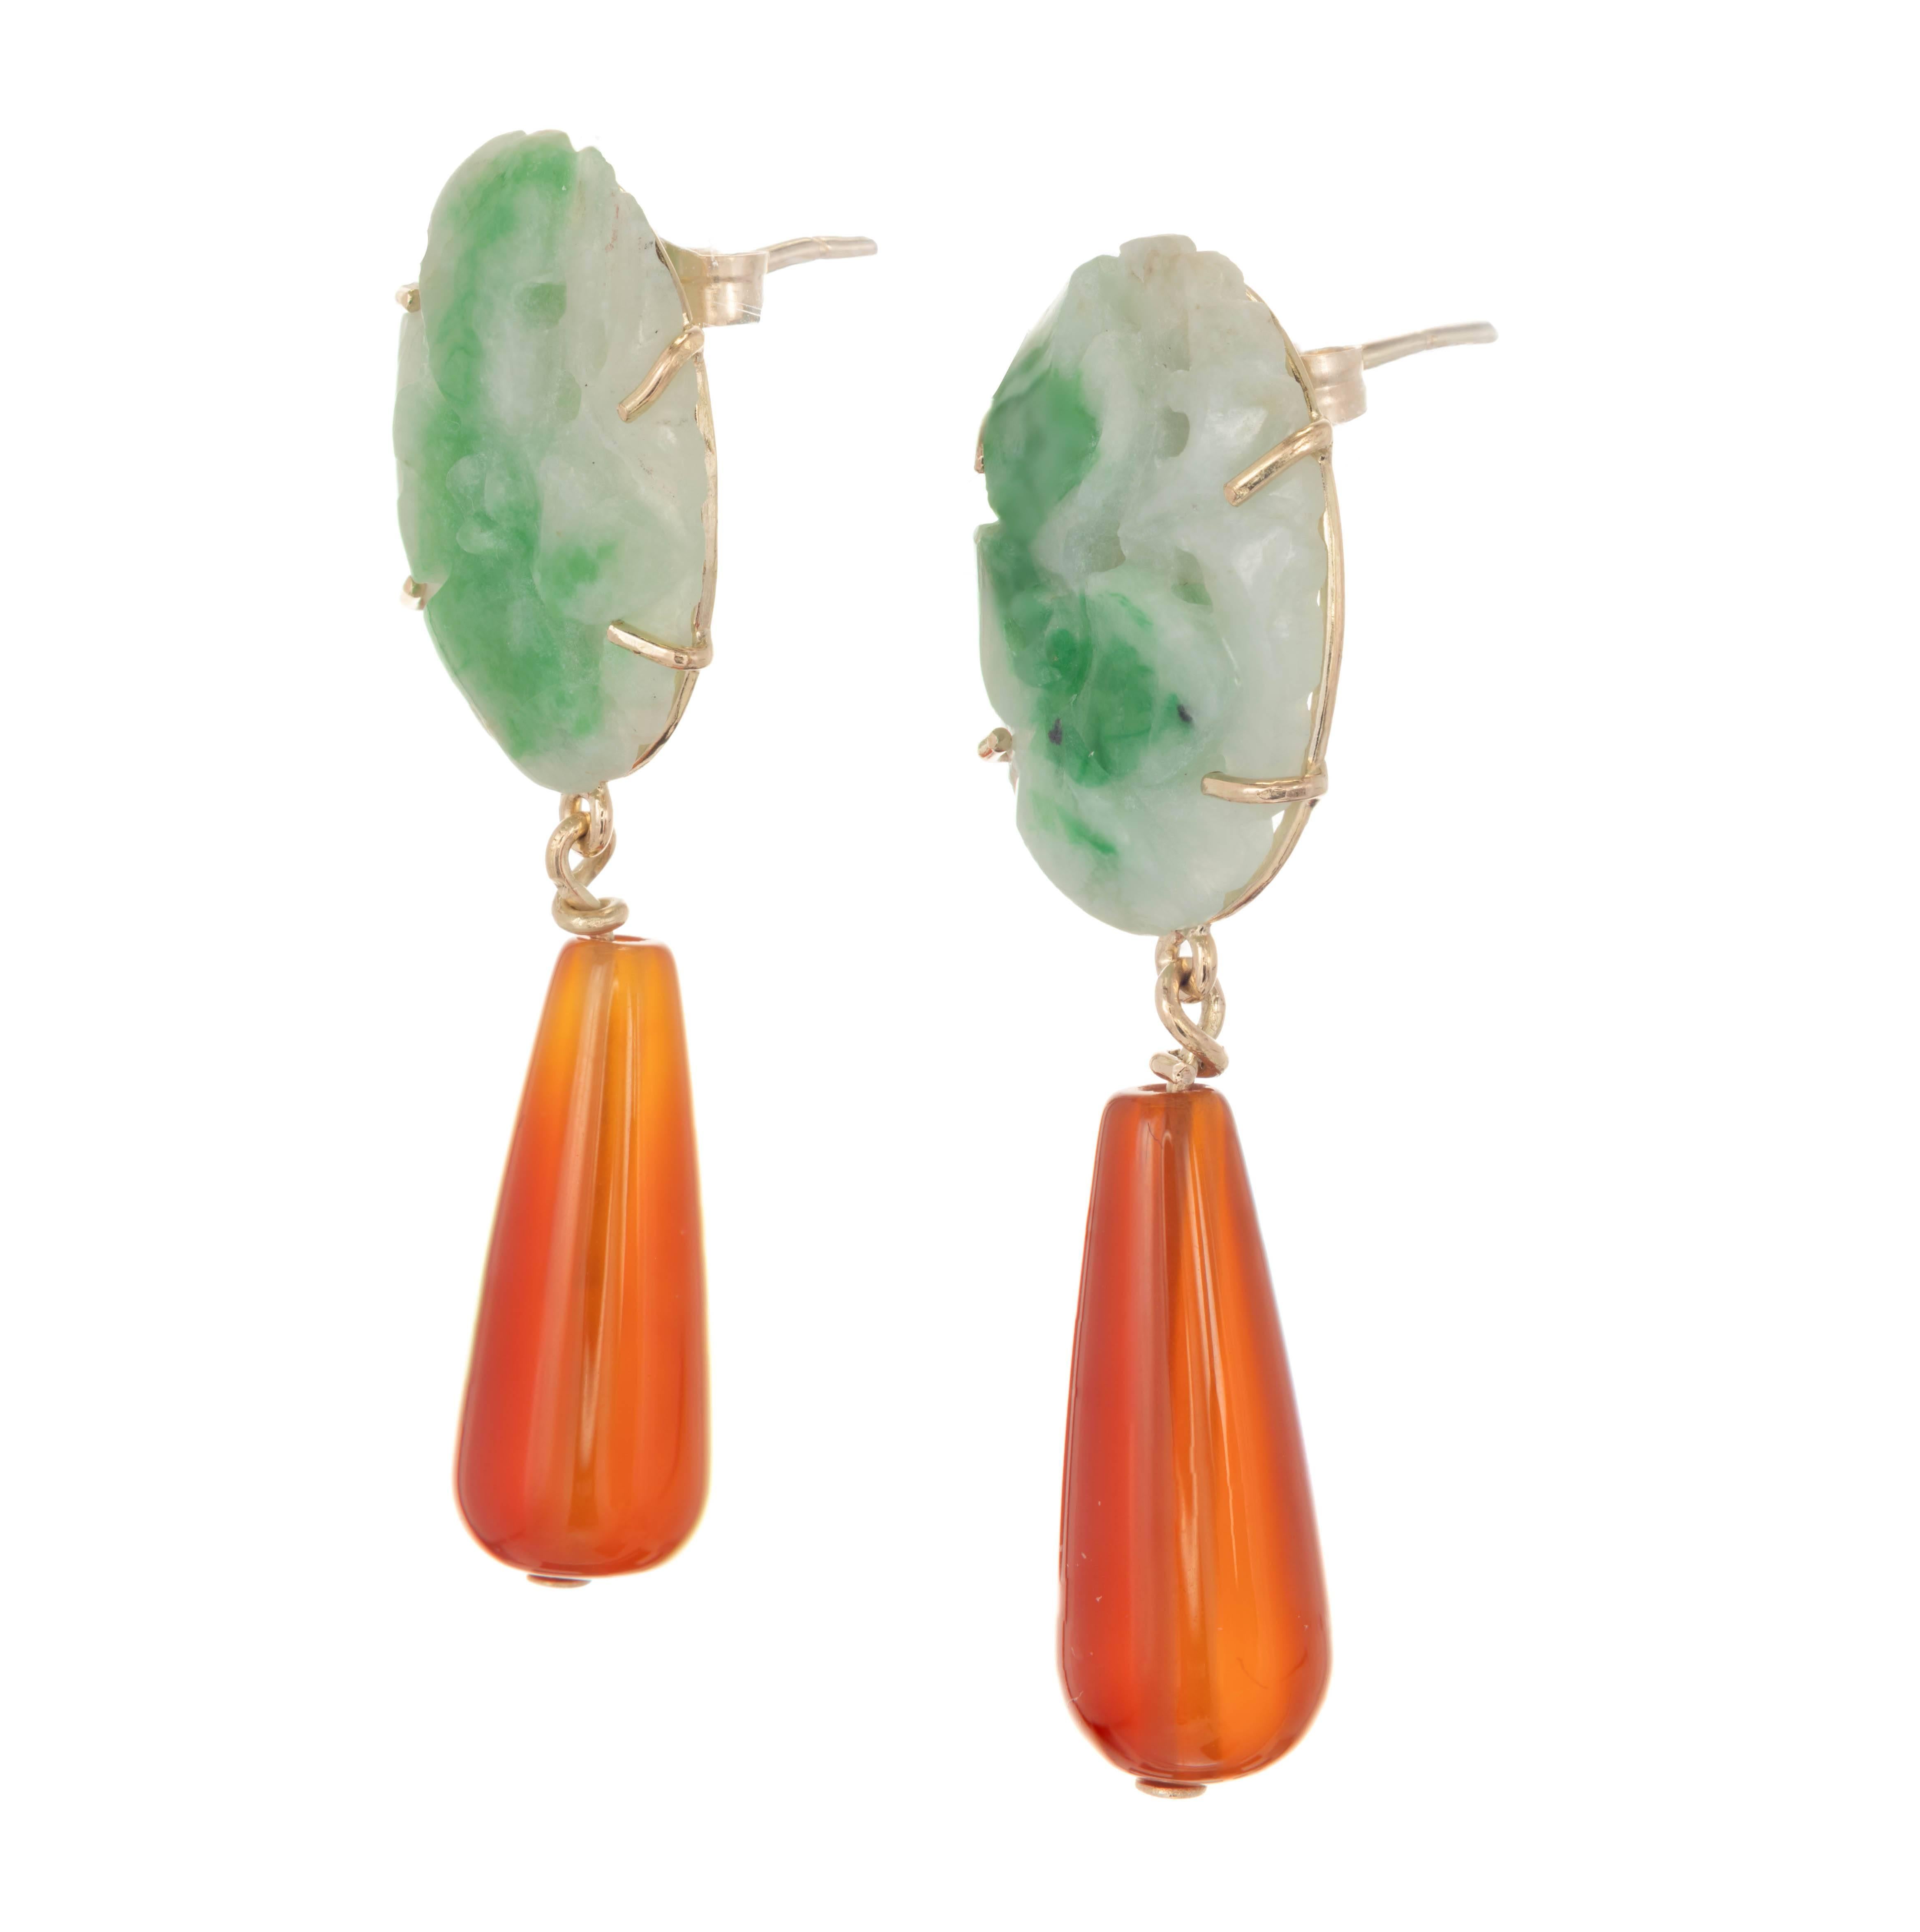 Pair of 14k yellow gold green jadeite and carnelian dangle earrings. Oval pierced carved jadeite jade stones of mottled green color are set above an orangish carnelian teardrop.

2 oval pierced carved mottled green jadeite jade 17.99-17.92 x